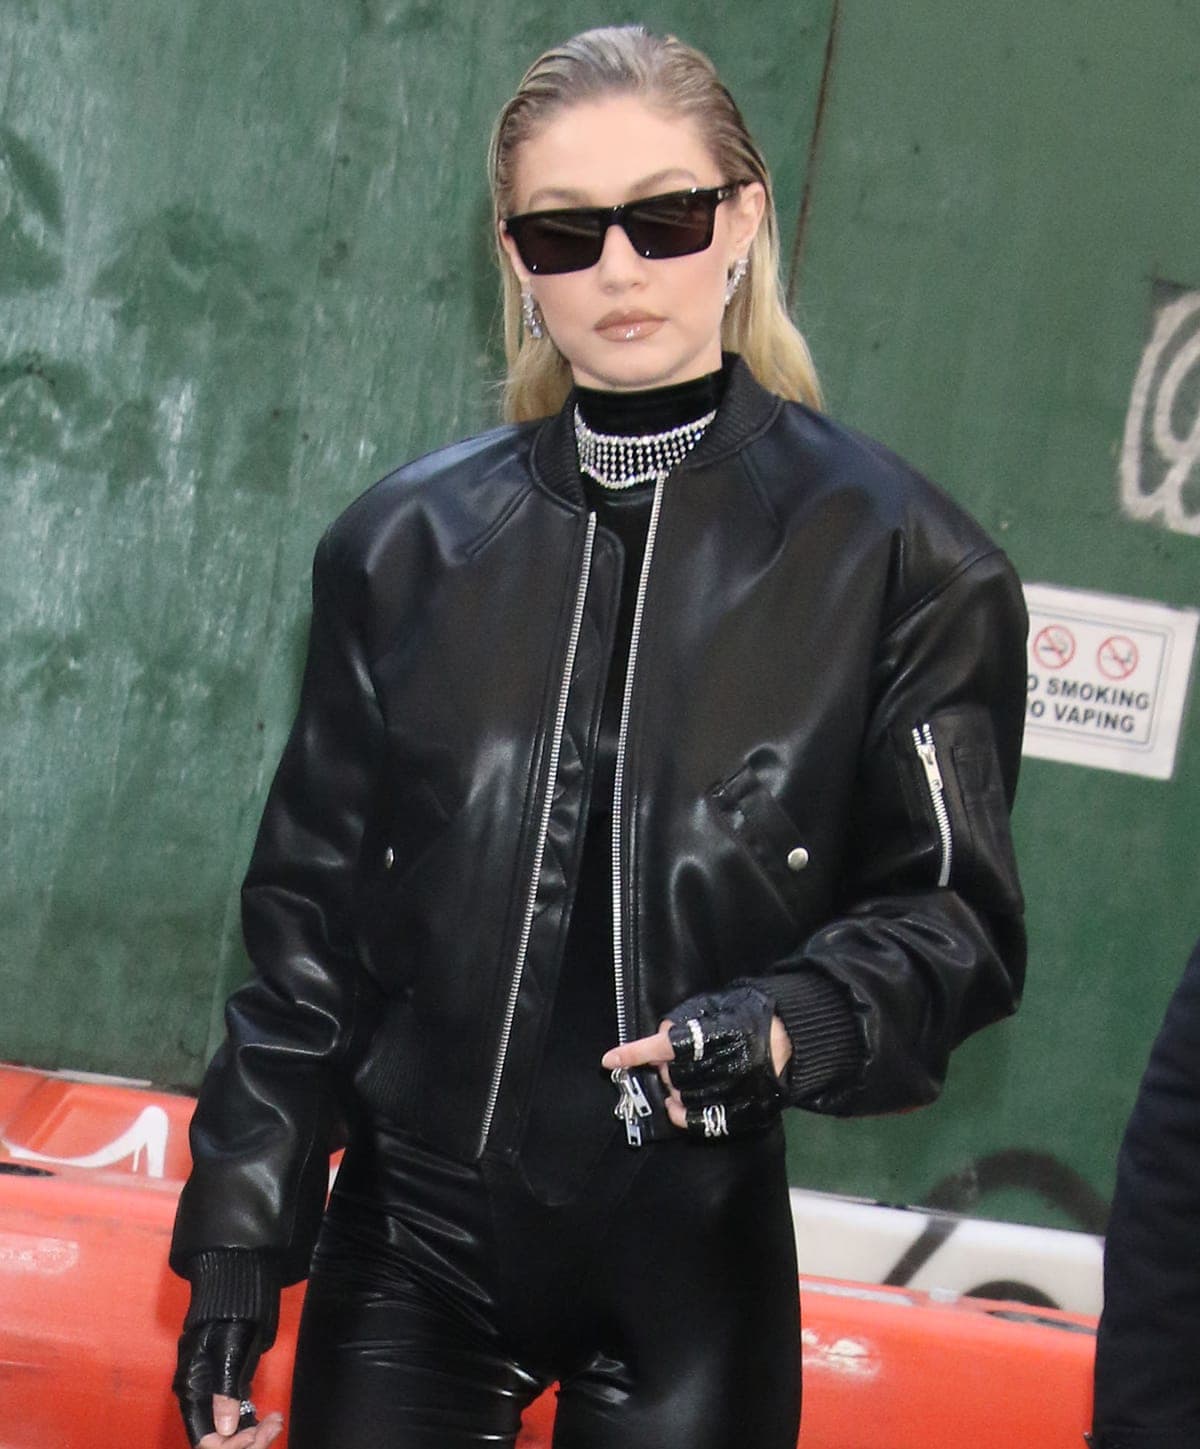 Gigi Hadid completes her biker look with boxy sunnies, fingerless biker gloves, and leather stiletto boots